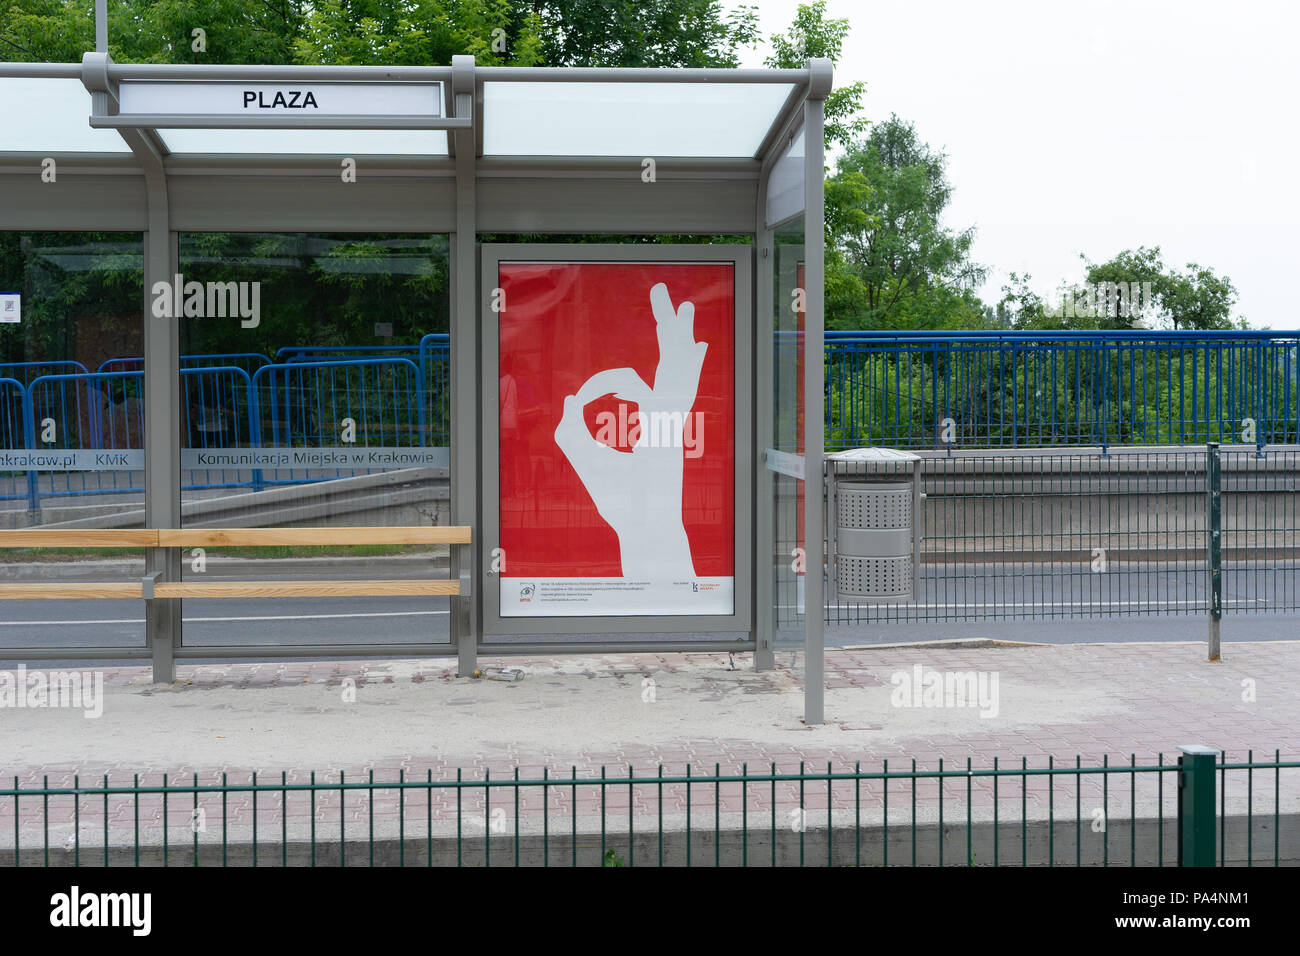 The Plaza Tram Stop on the outskirts of Krakow, Poland,Europe. Stock Photo